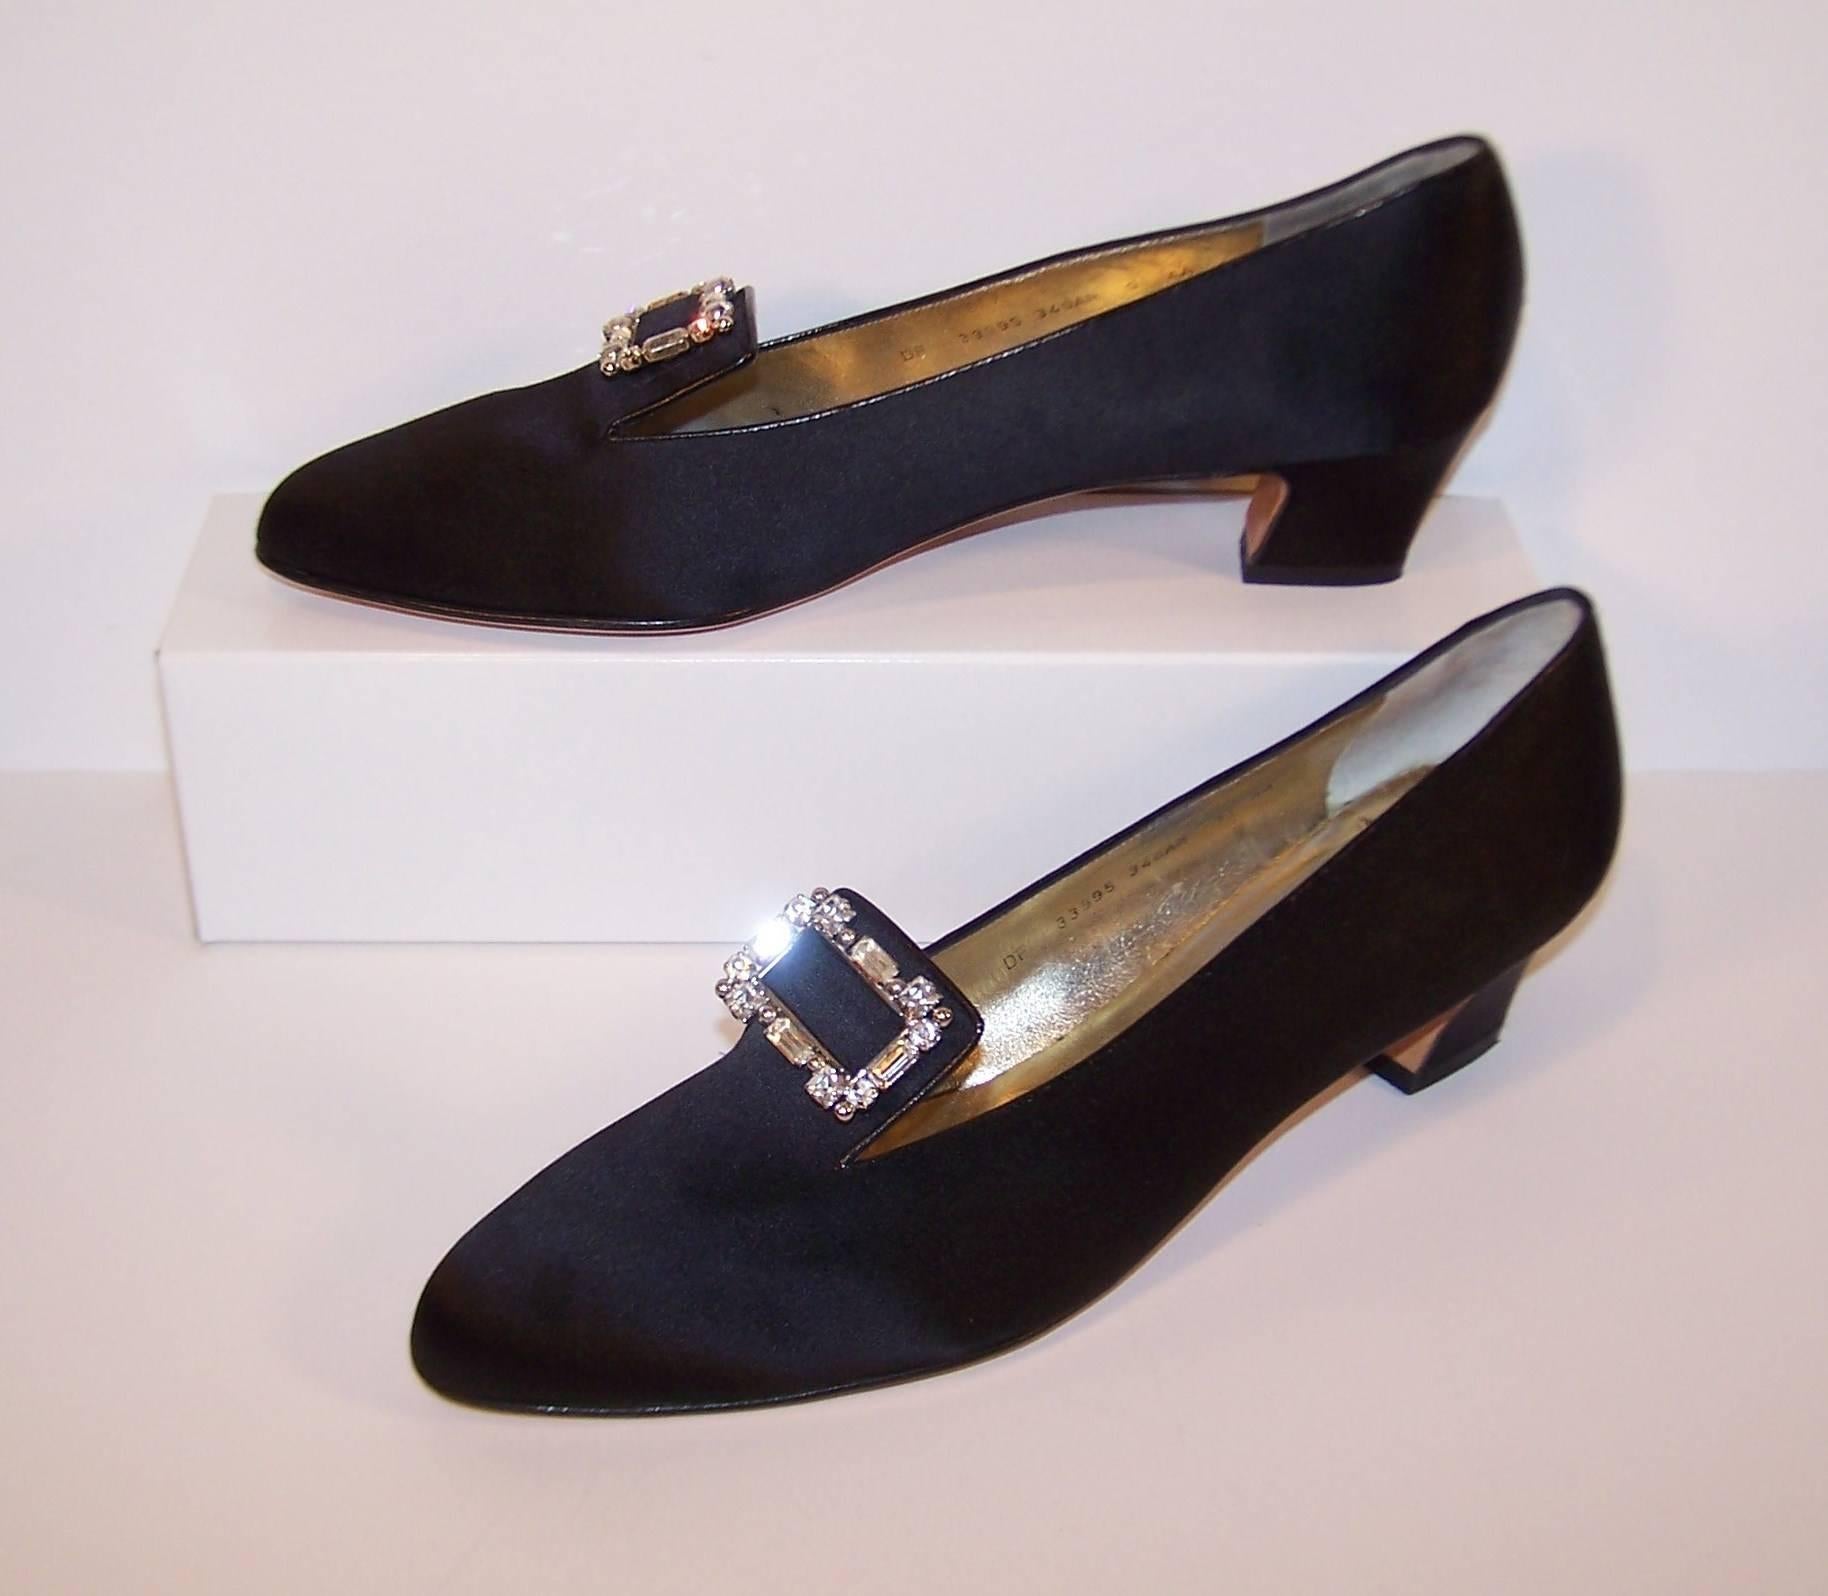 These elegant evening slippers by Ferragamo have all the comfort of modern footwear with the rich details of Edwardian style.  The black satin body is trimmed in black leather and sports square rhinestone and stud encrusted buckles.  The 2"